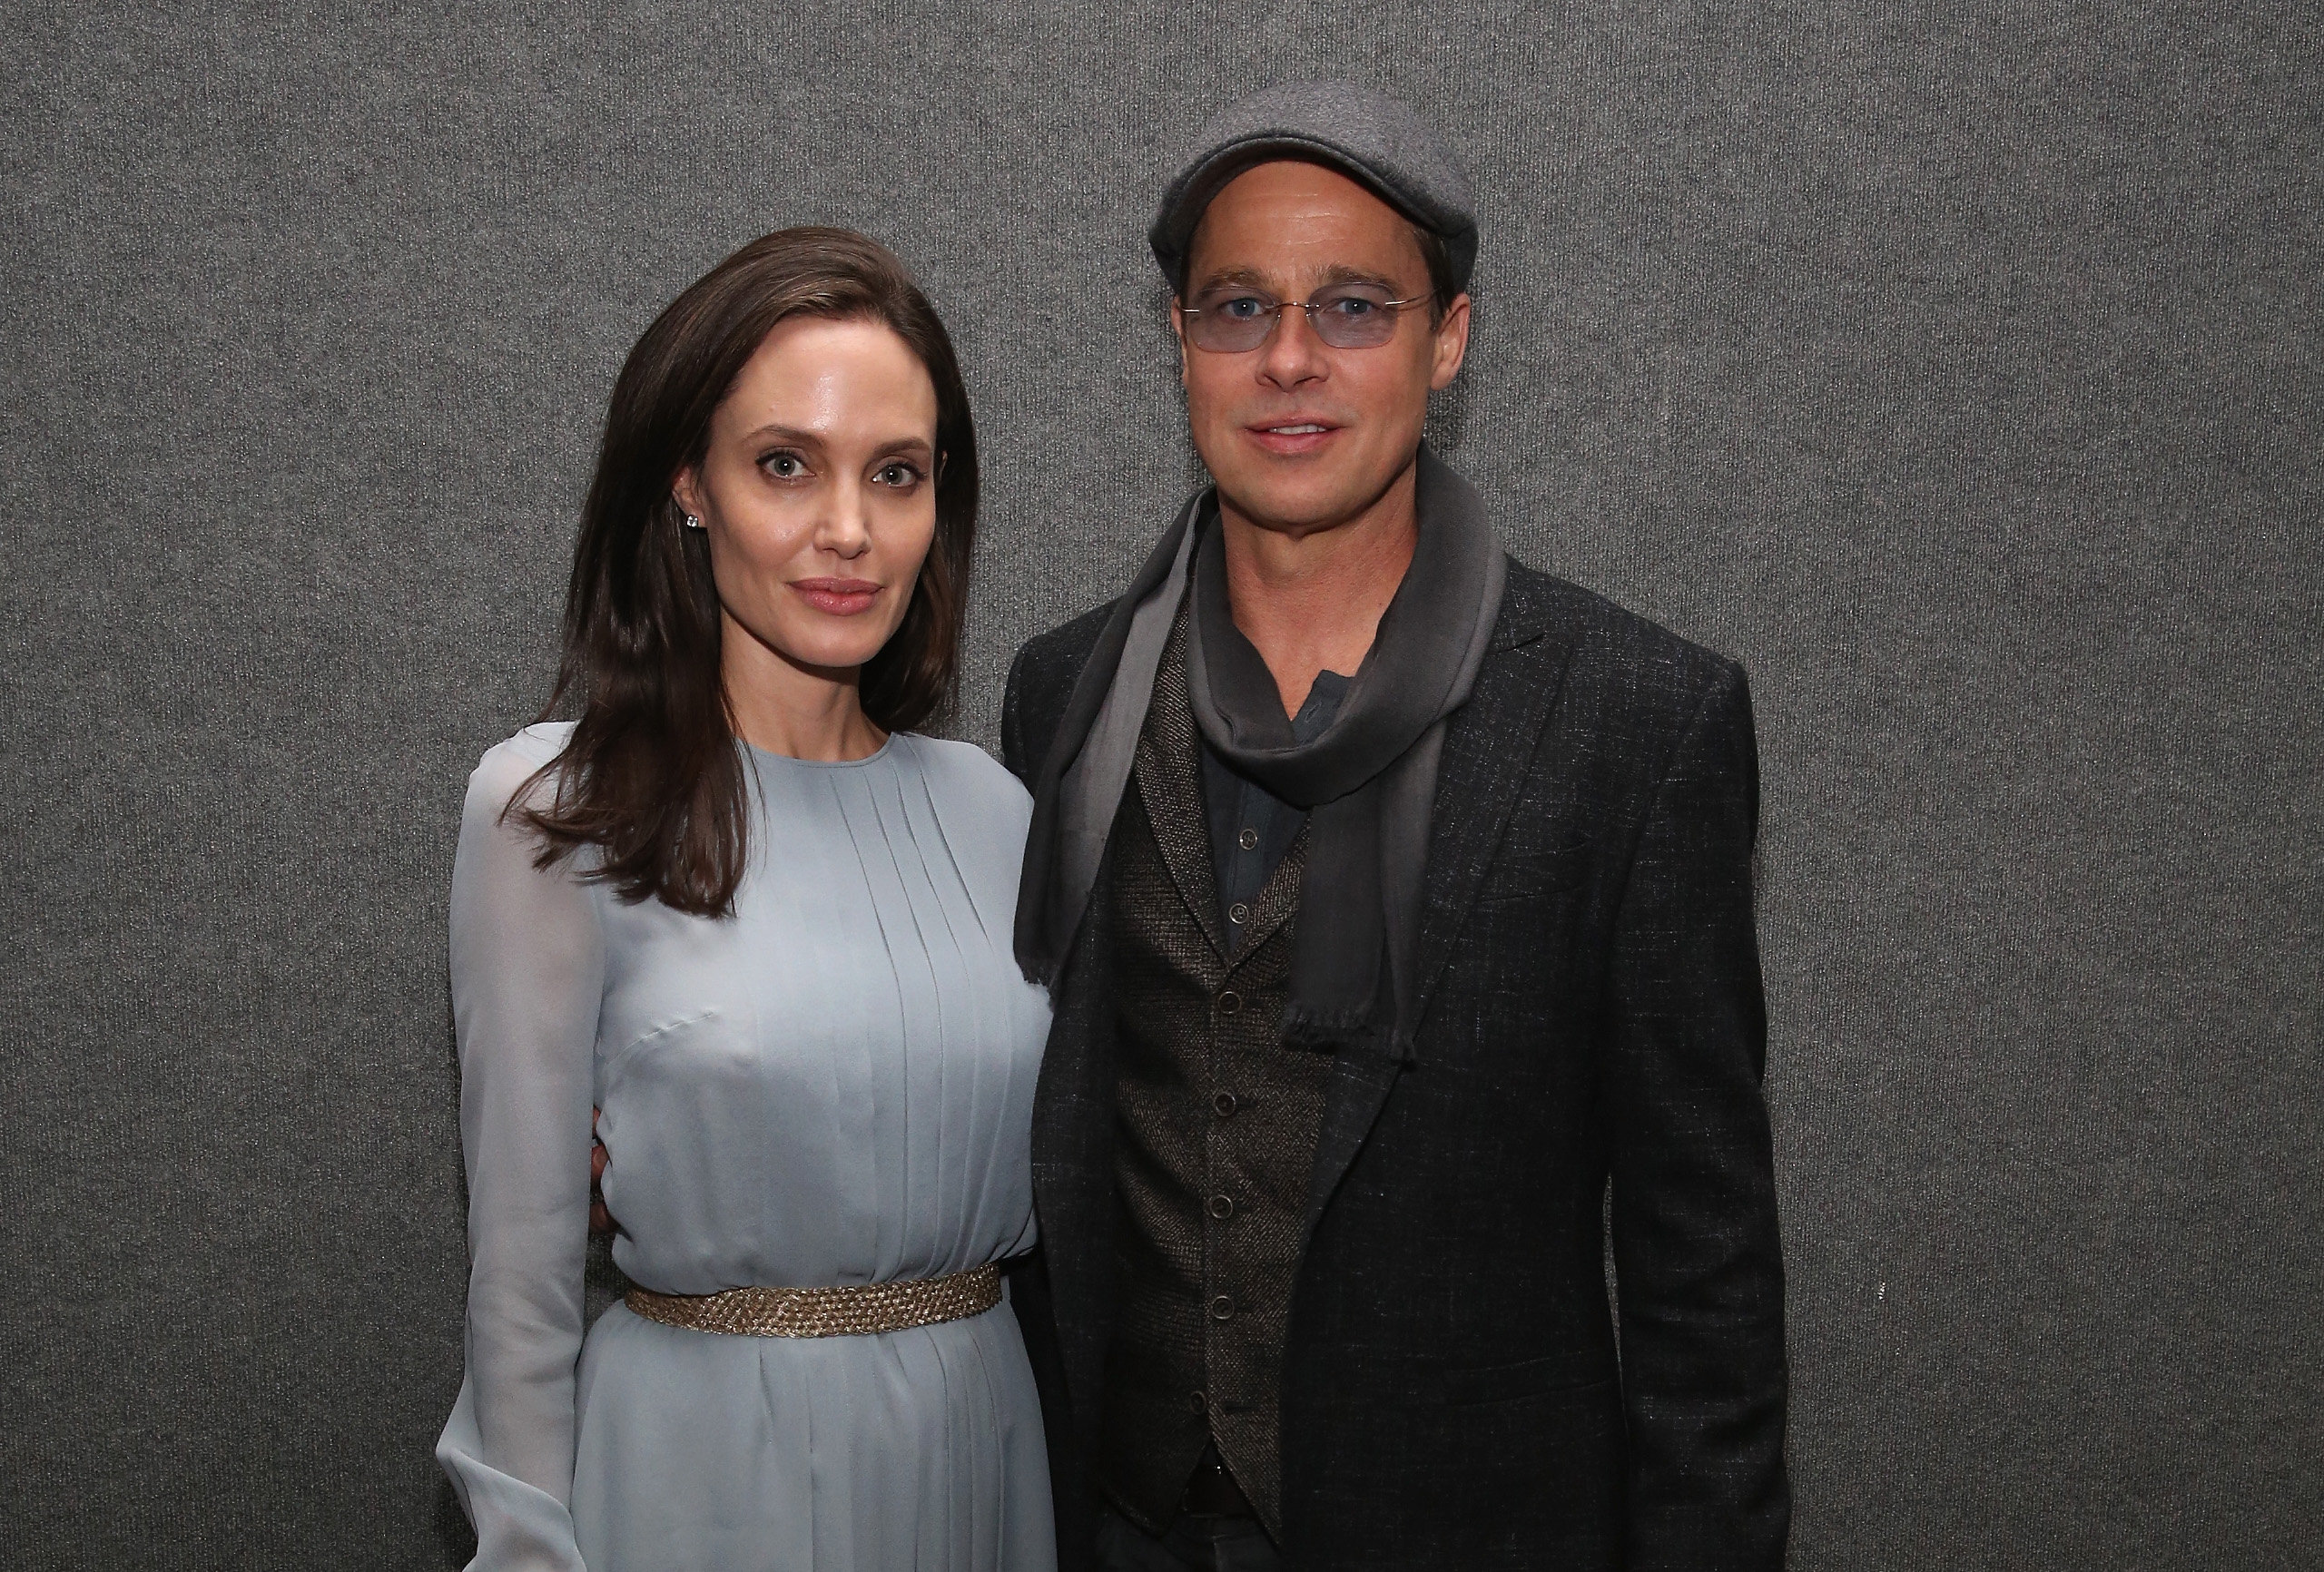 Angelina Jolie and Brad Pitt attend an official Academy Screening of BY THE SEA hosted by The Academy Of Motion Picture Arts And Sciences in New York City on Nov. 3, 2015. (Robin Marchant&mdash;Academy of Motion Picture Arts and Sciences/Getty Images)